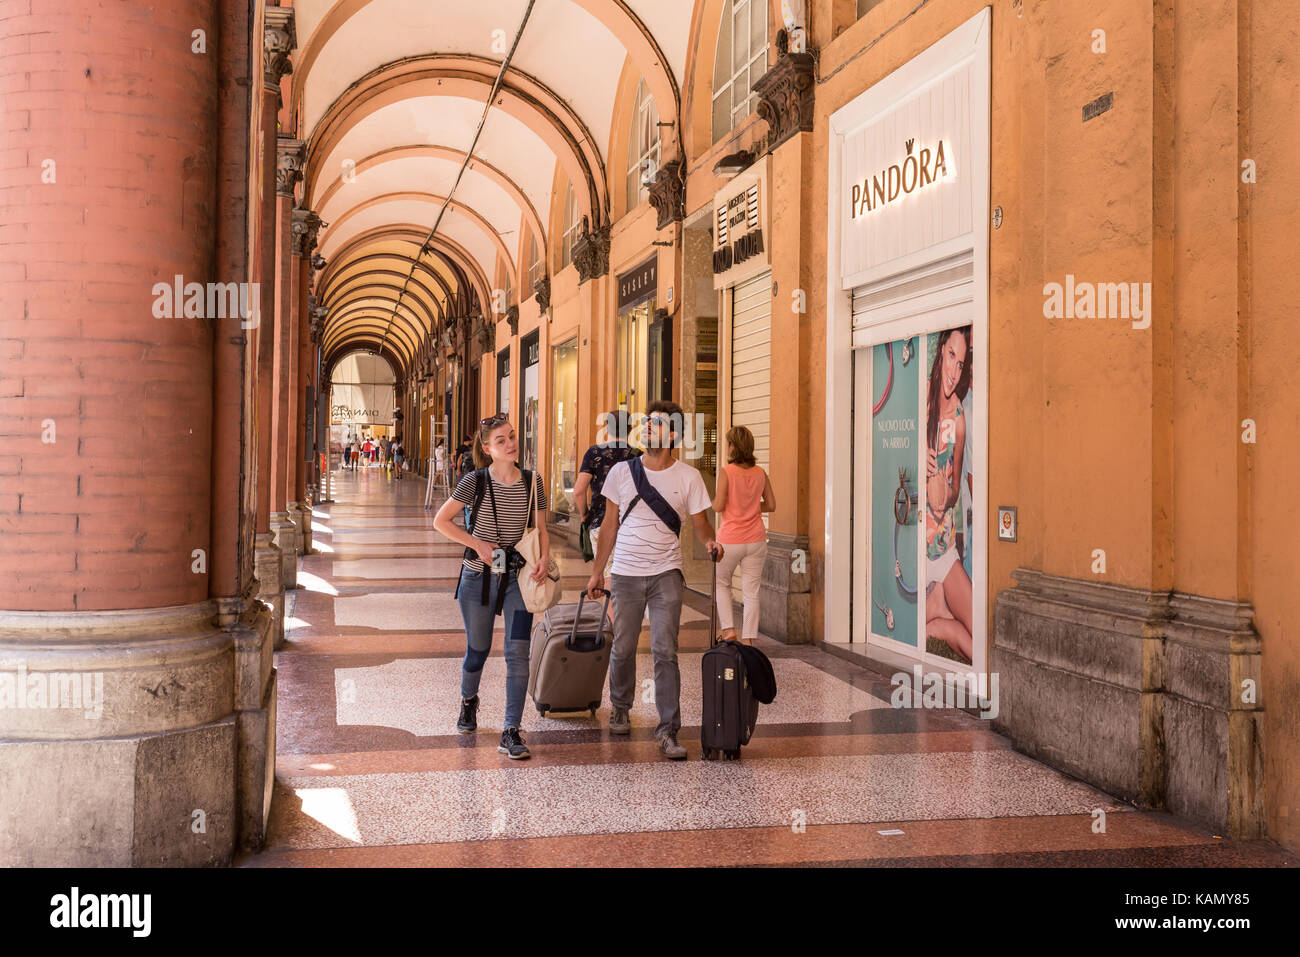 Via Emilia High Resolution Stock Photography and Images - Alamy